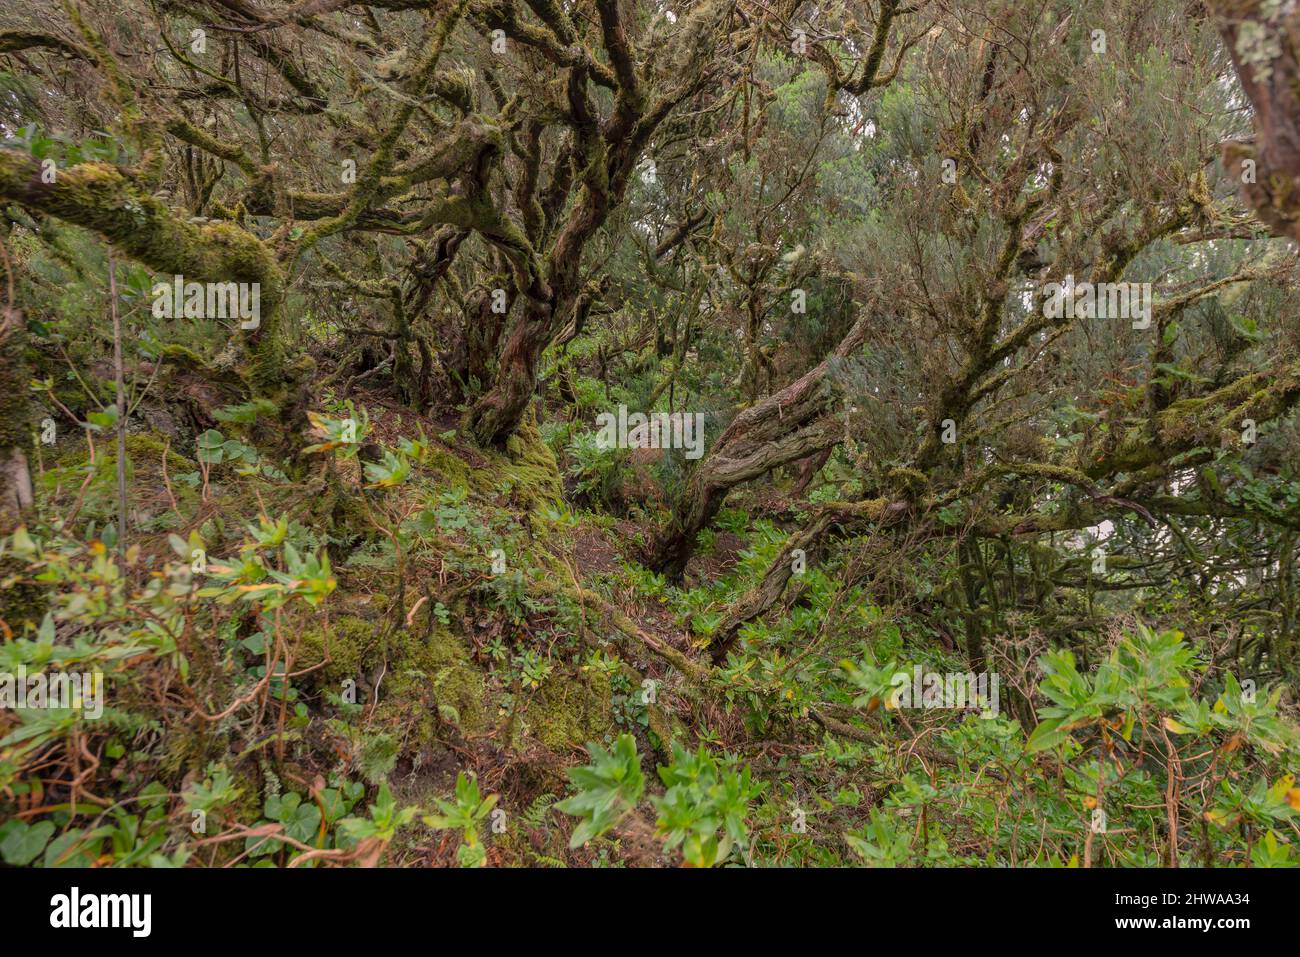 Laurel forest at the Garajonay National Park, Canary Islands, La Gomera, Garajonay National Park Stock Photo